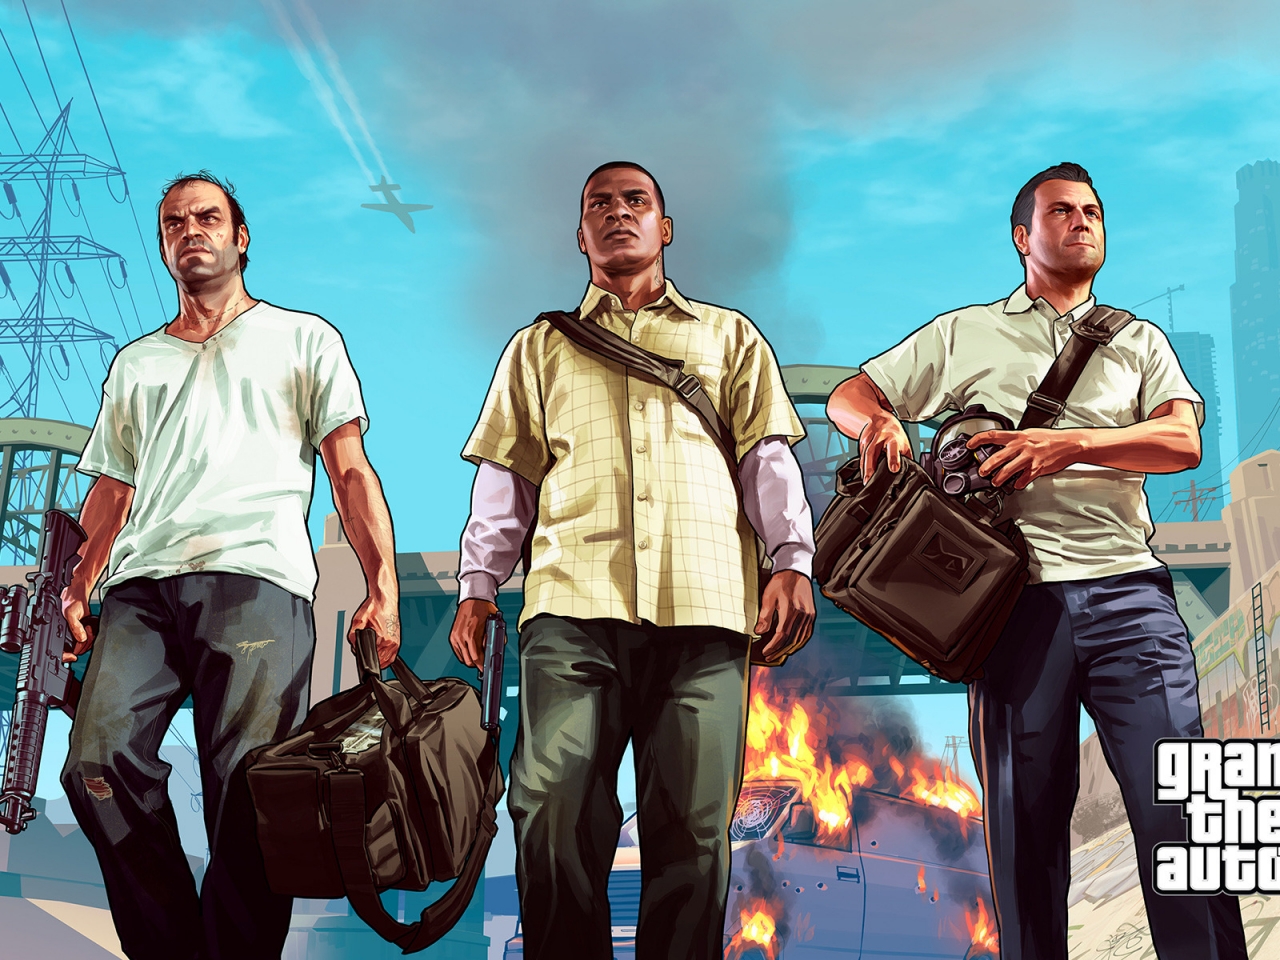 Gta 5 Main Characters for 1280 x 960 resolution